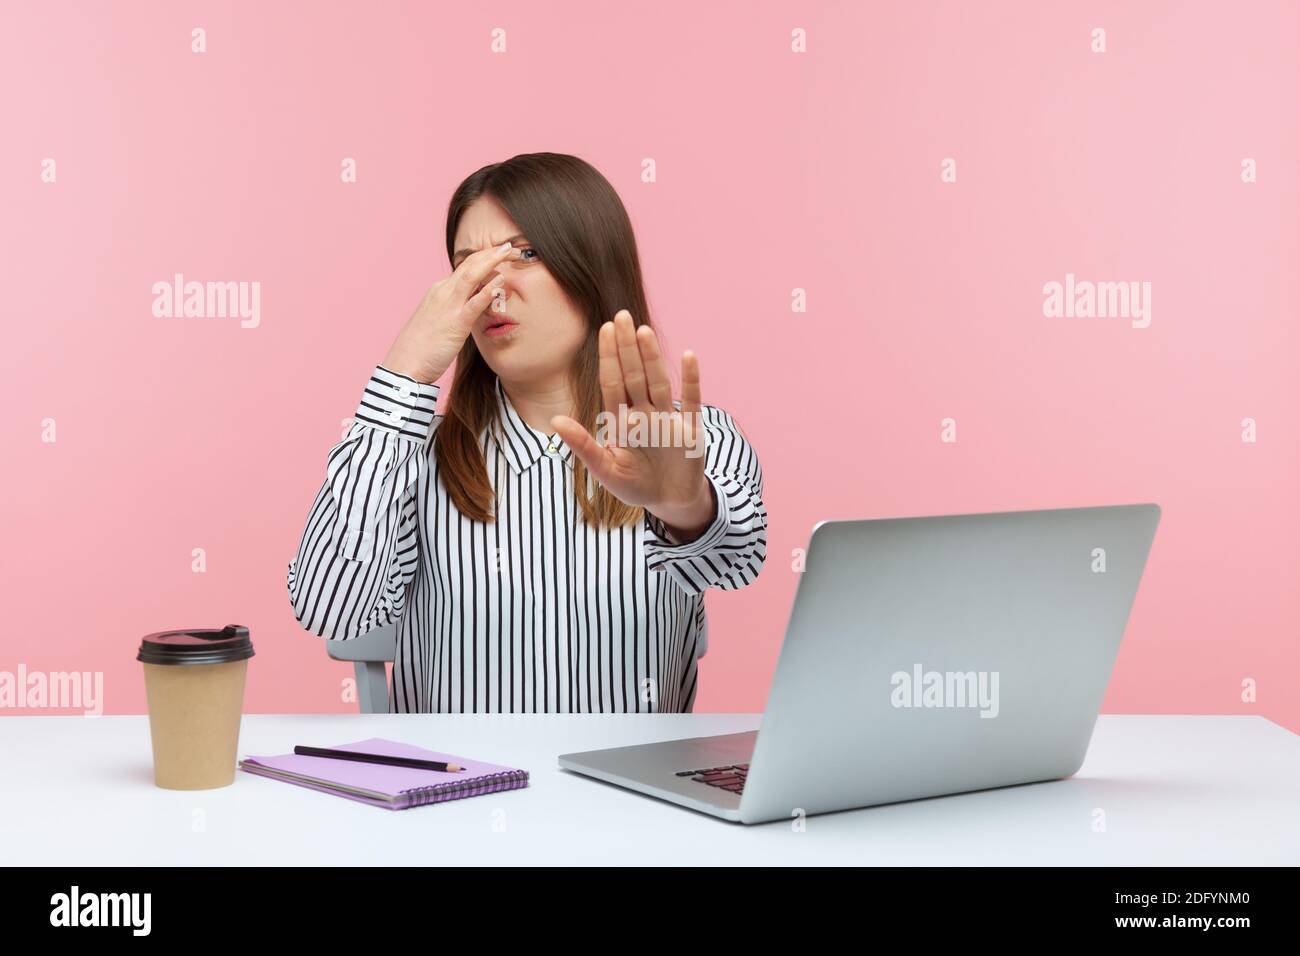 Confused woman office employee sitting at workplace with laptop and holding breath, pinching her nose to avoid awful stink, gesturing stop. Indoor stu Stock Photo